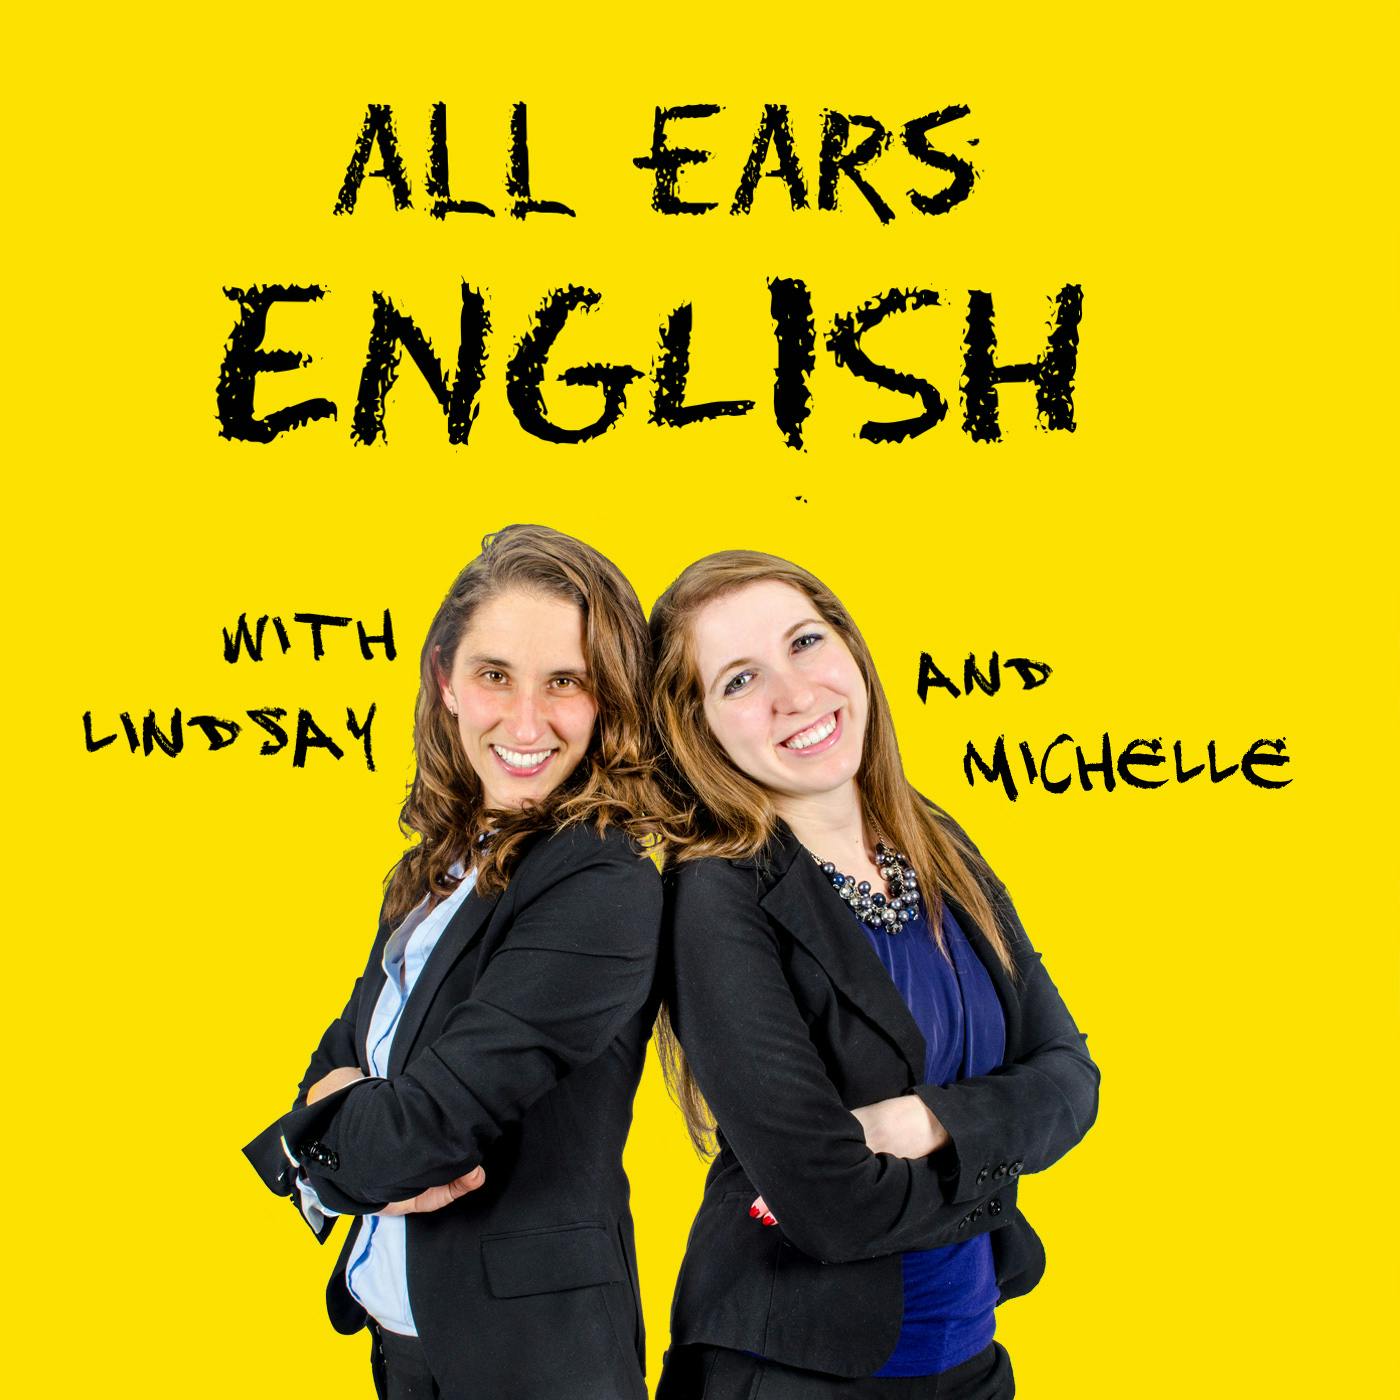 AEE 1398: How to Answer Authentically in English When Someone Asks How You Are